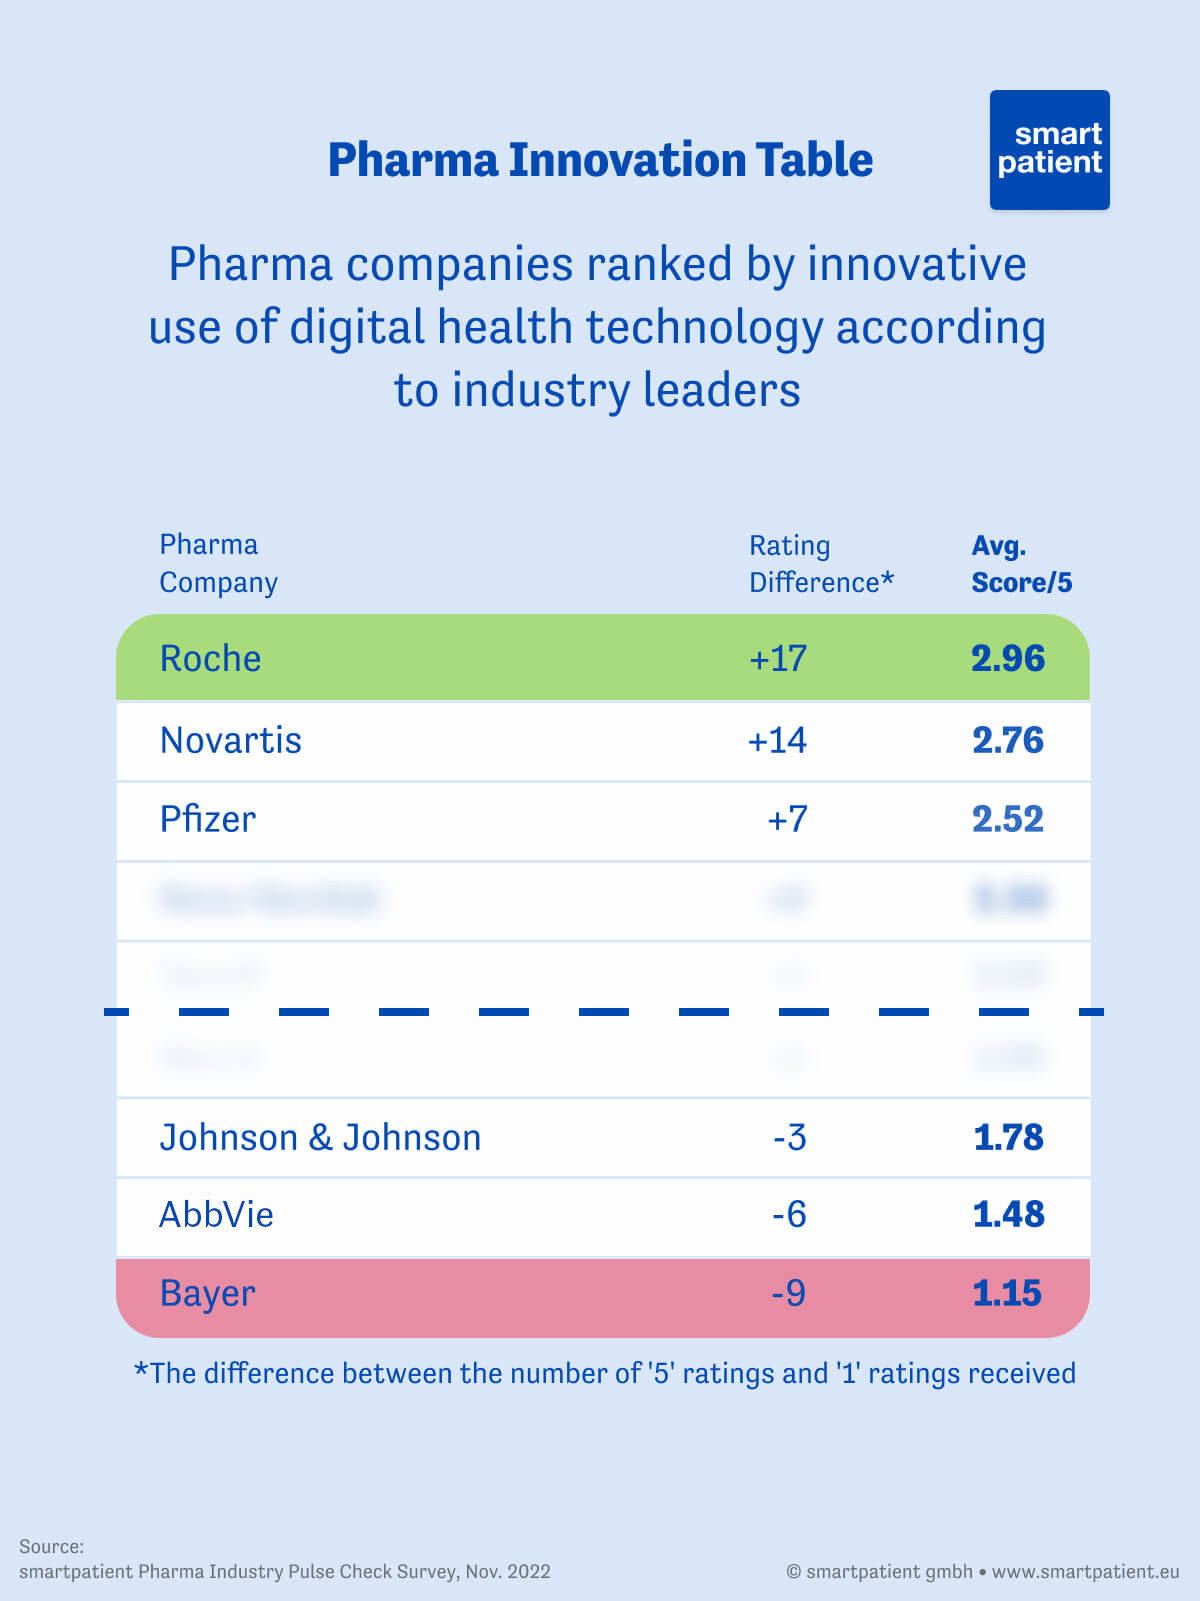 table showing which pharma companies are considered the most and least innovative according to our Industry Pulse Check survey. Roche, Novartis, and Pfizer are considered the most innovative while J&J, AbbVie, and Bayer are considered the least innovative